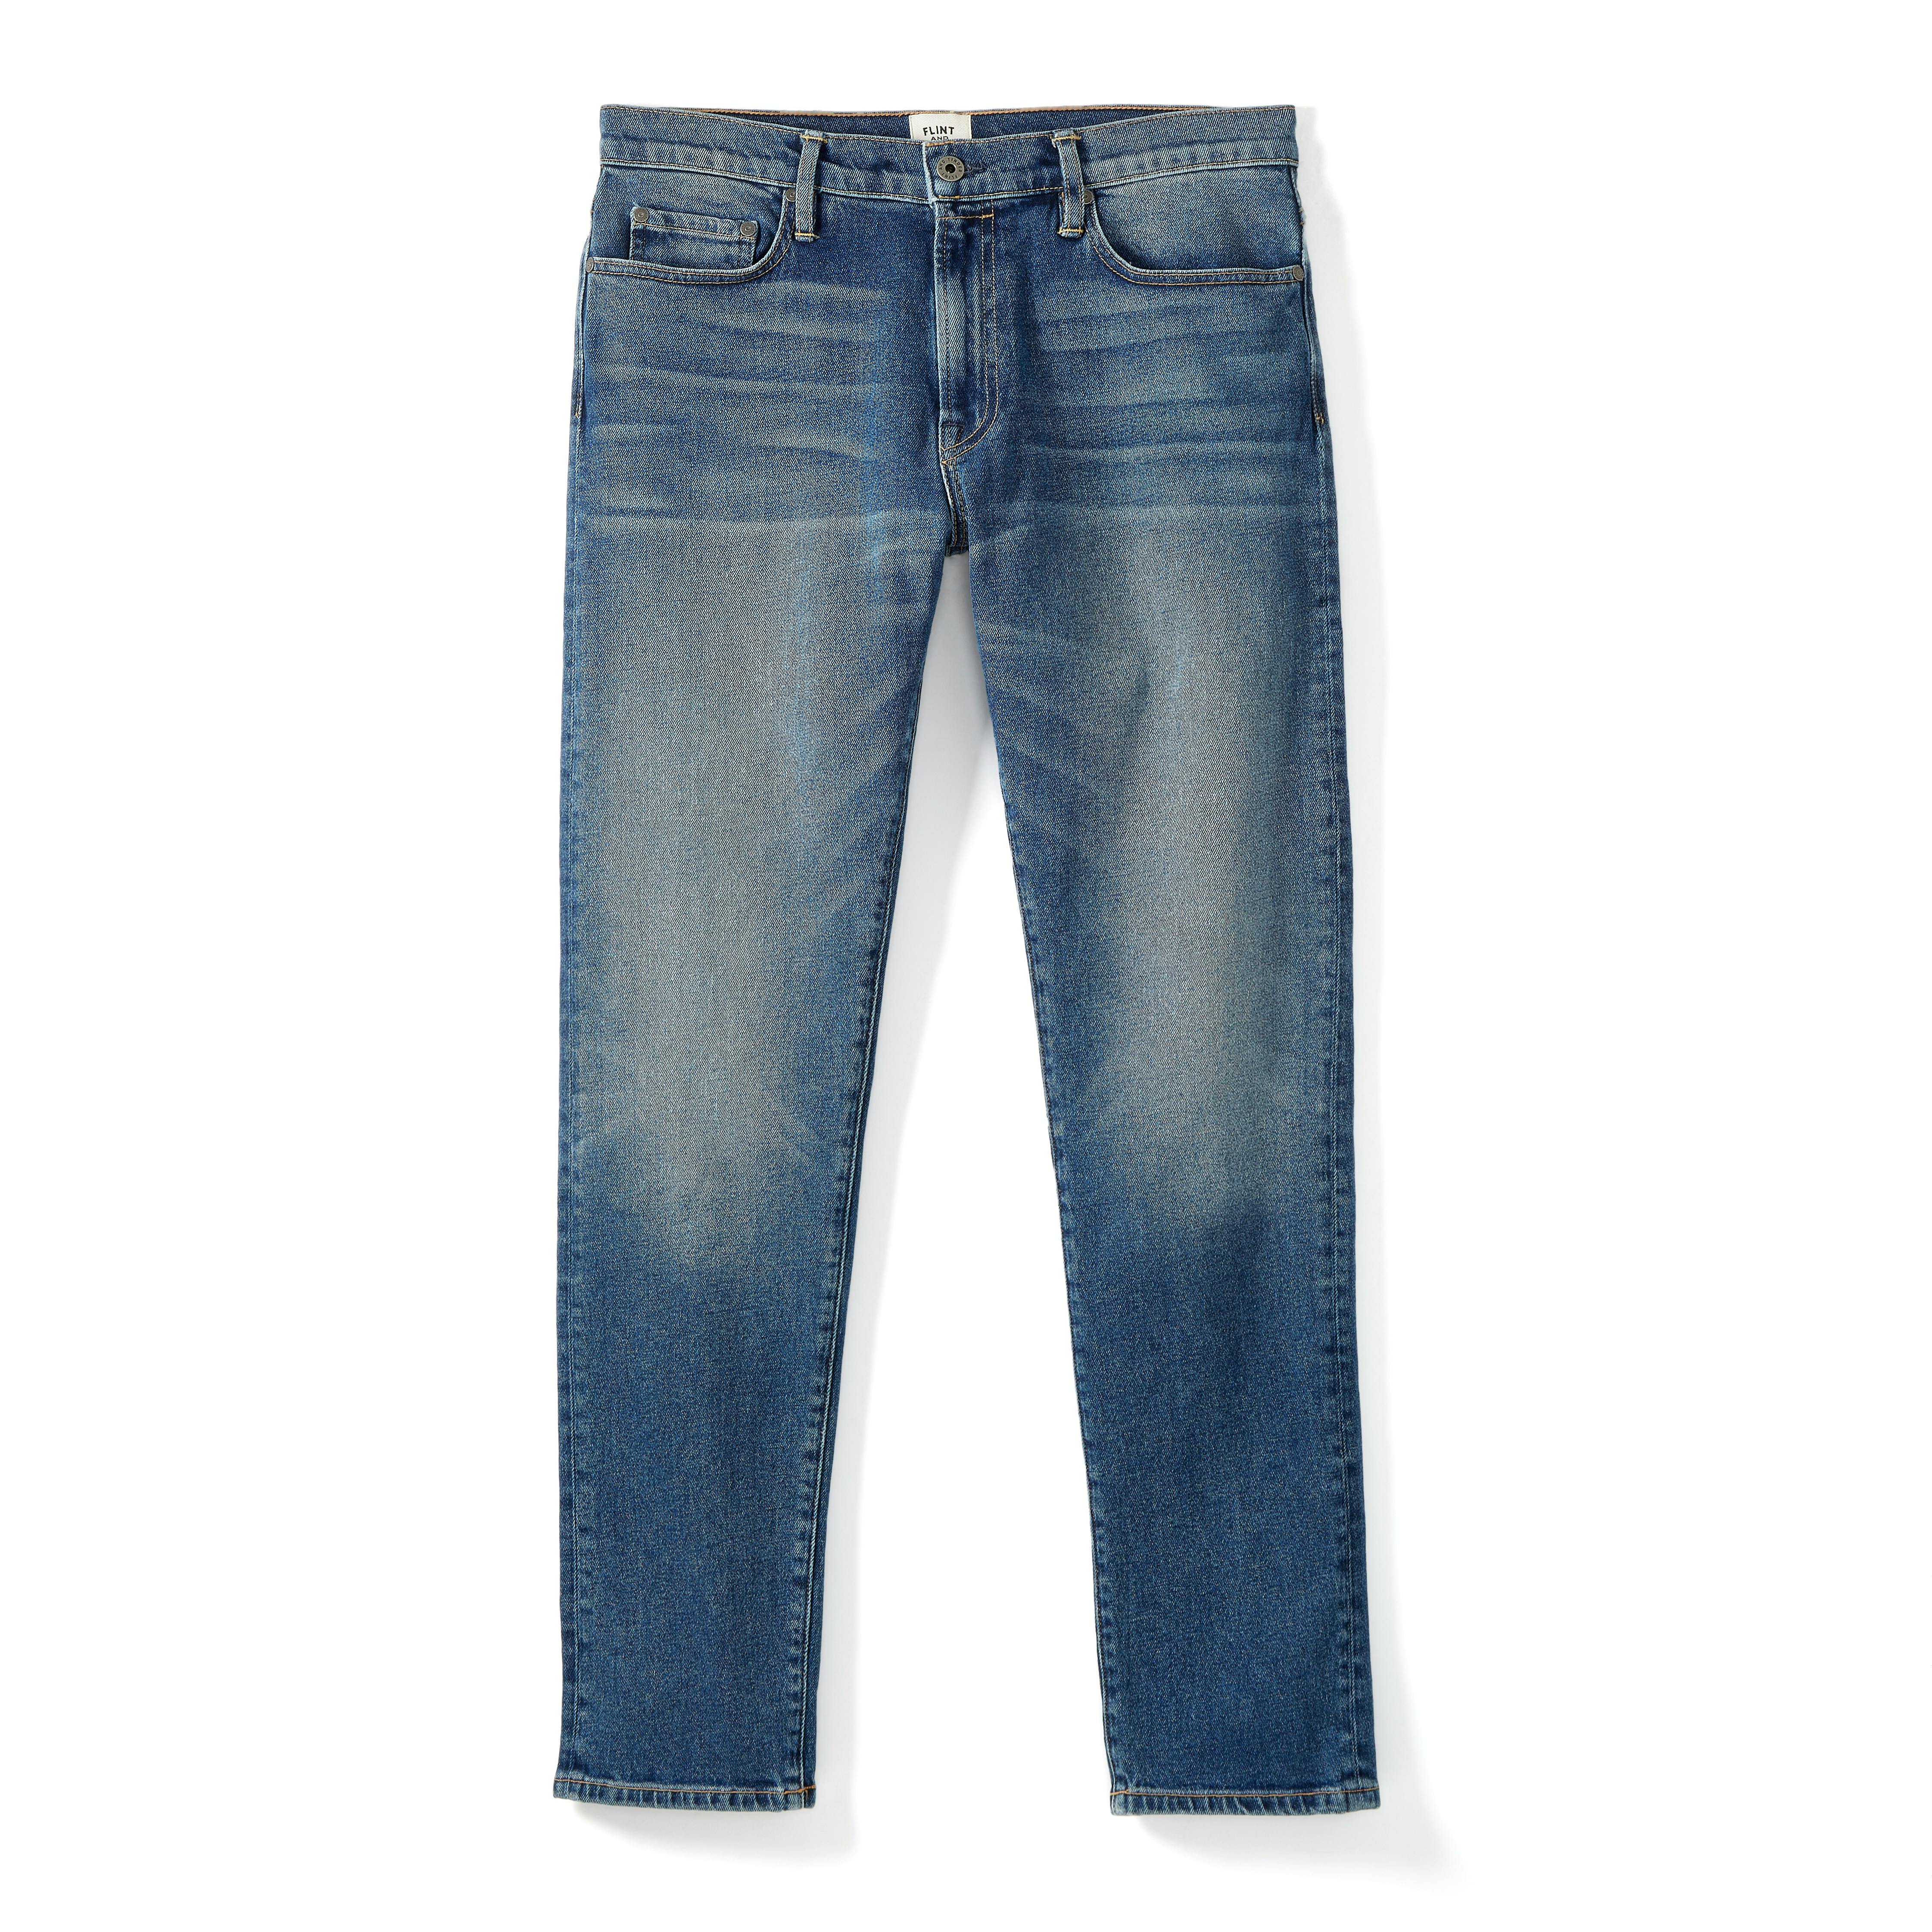 All-American Stretch Denim - Athletic Tapered